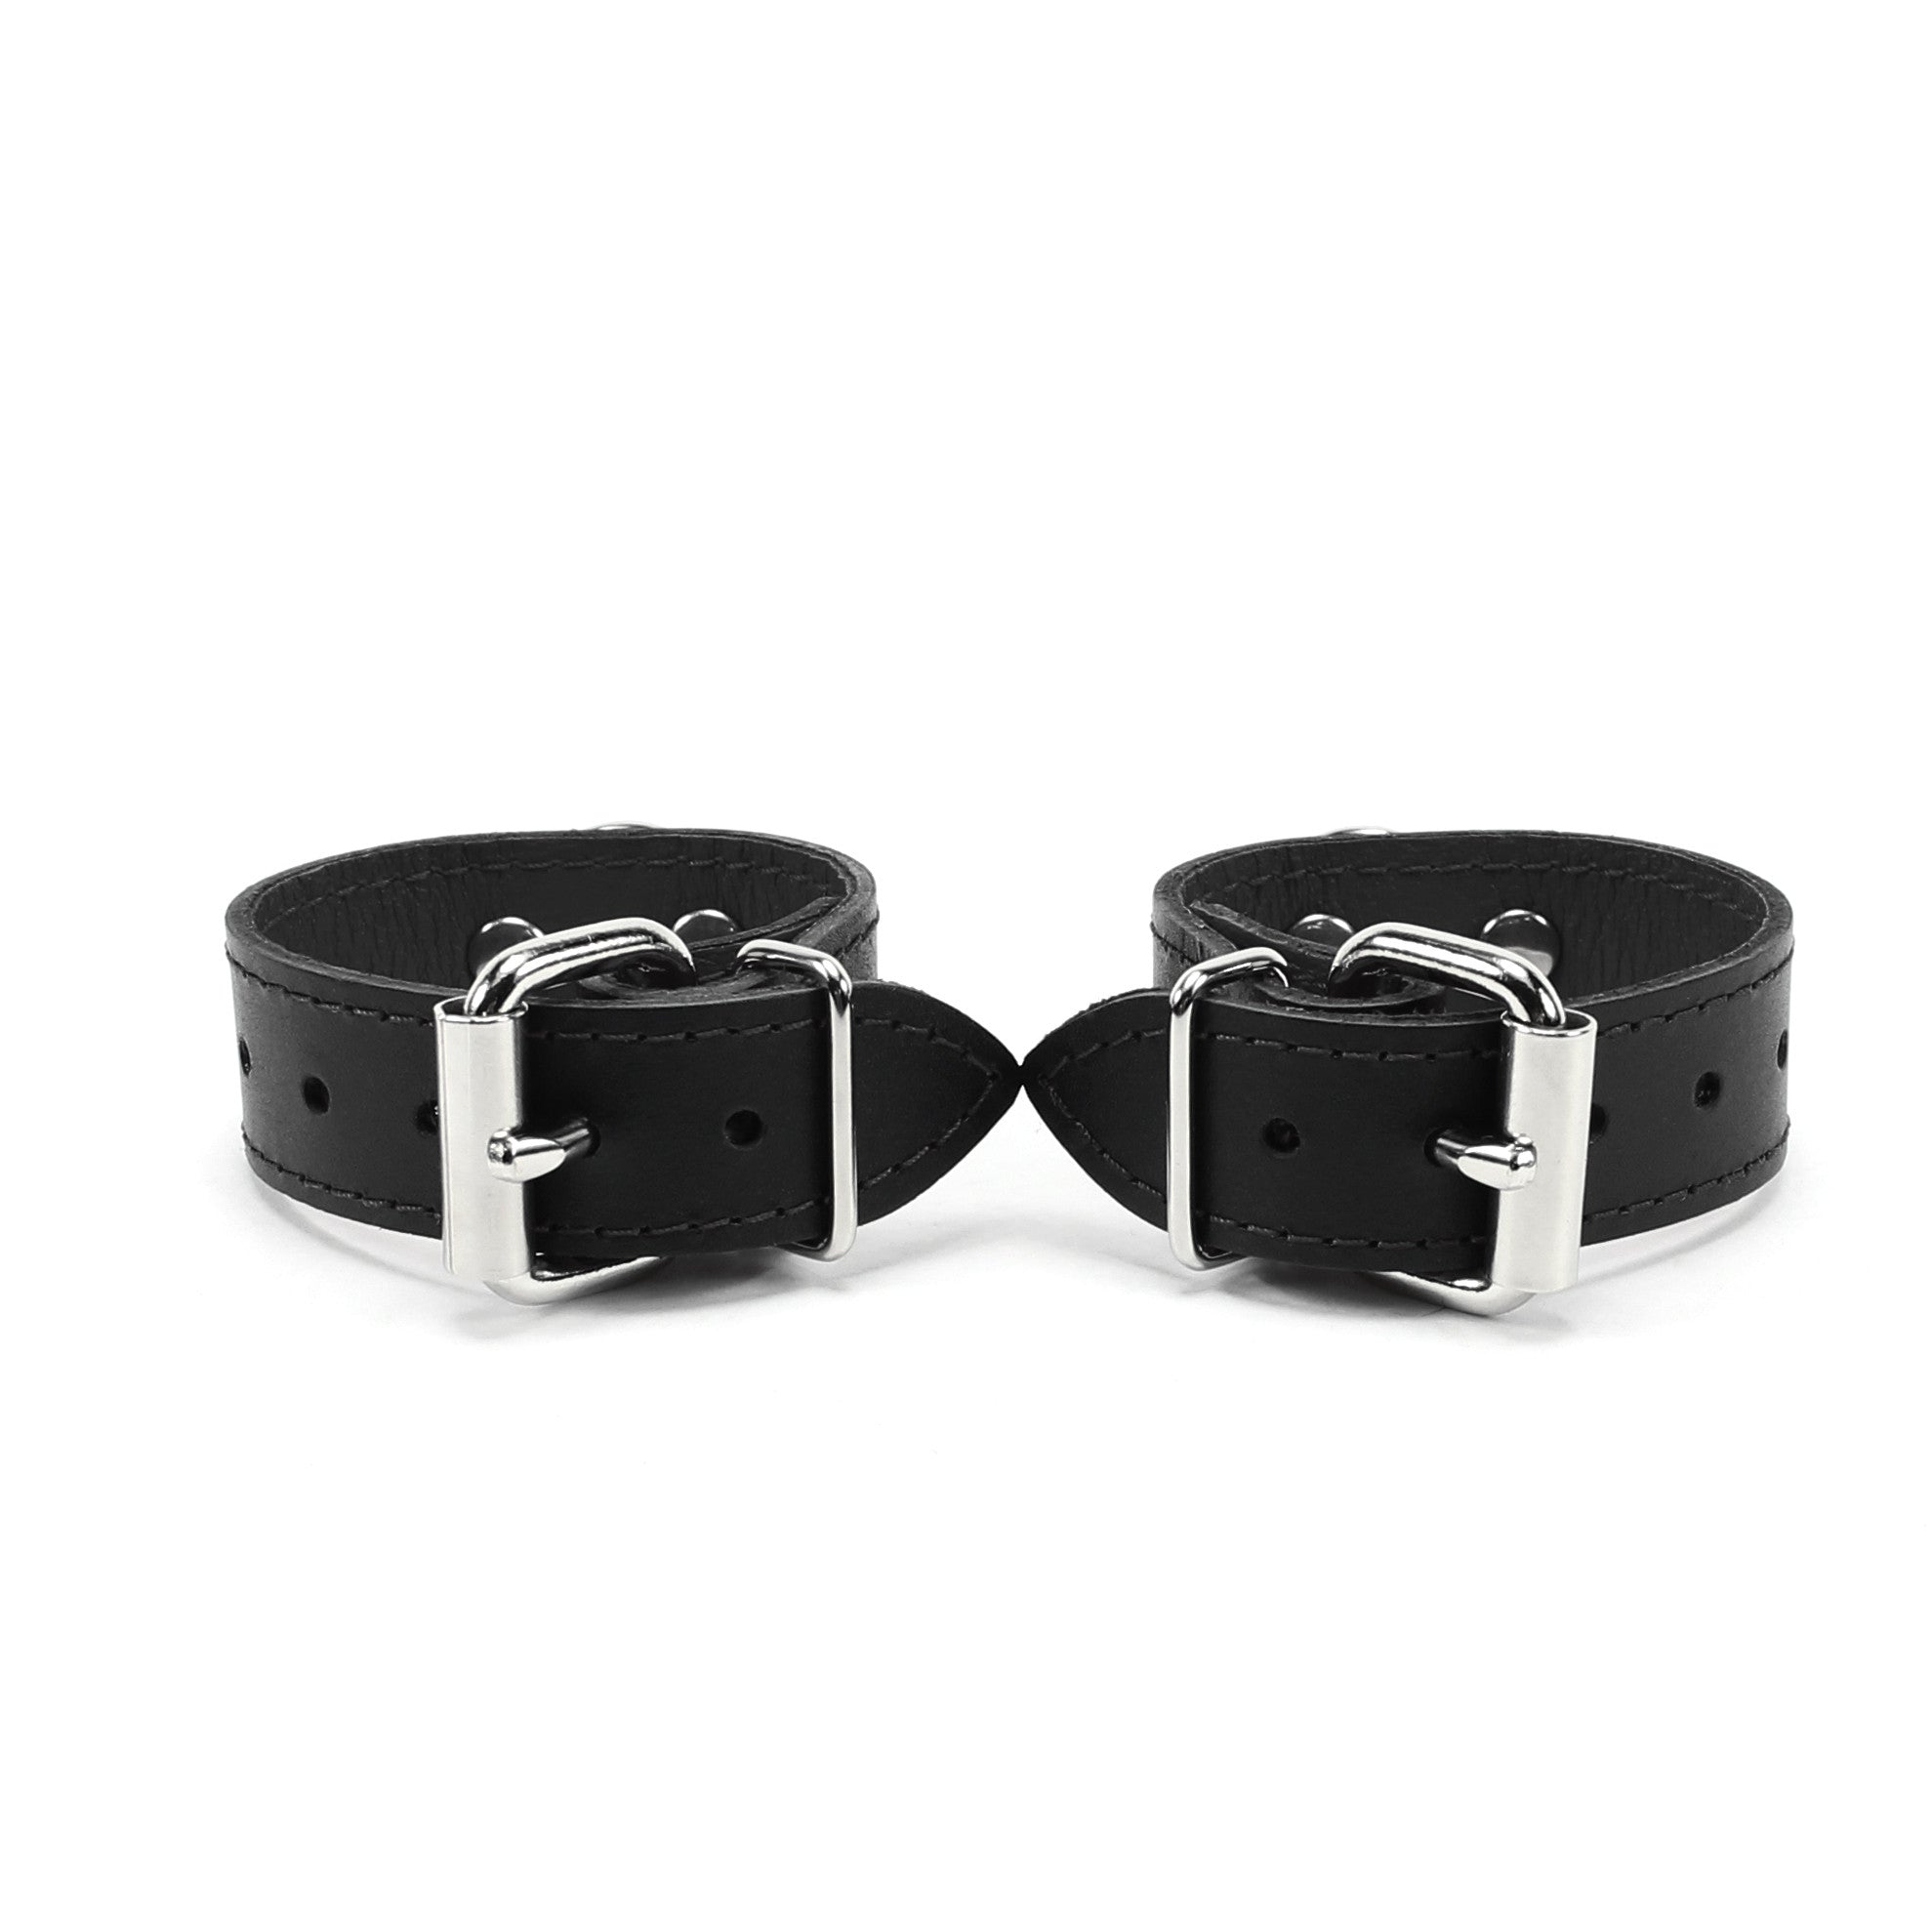 back of 1-inch wide black padded leather BDSM cuffs